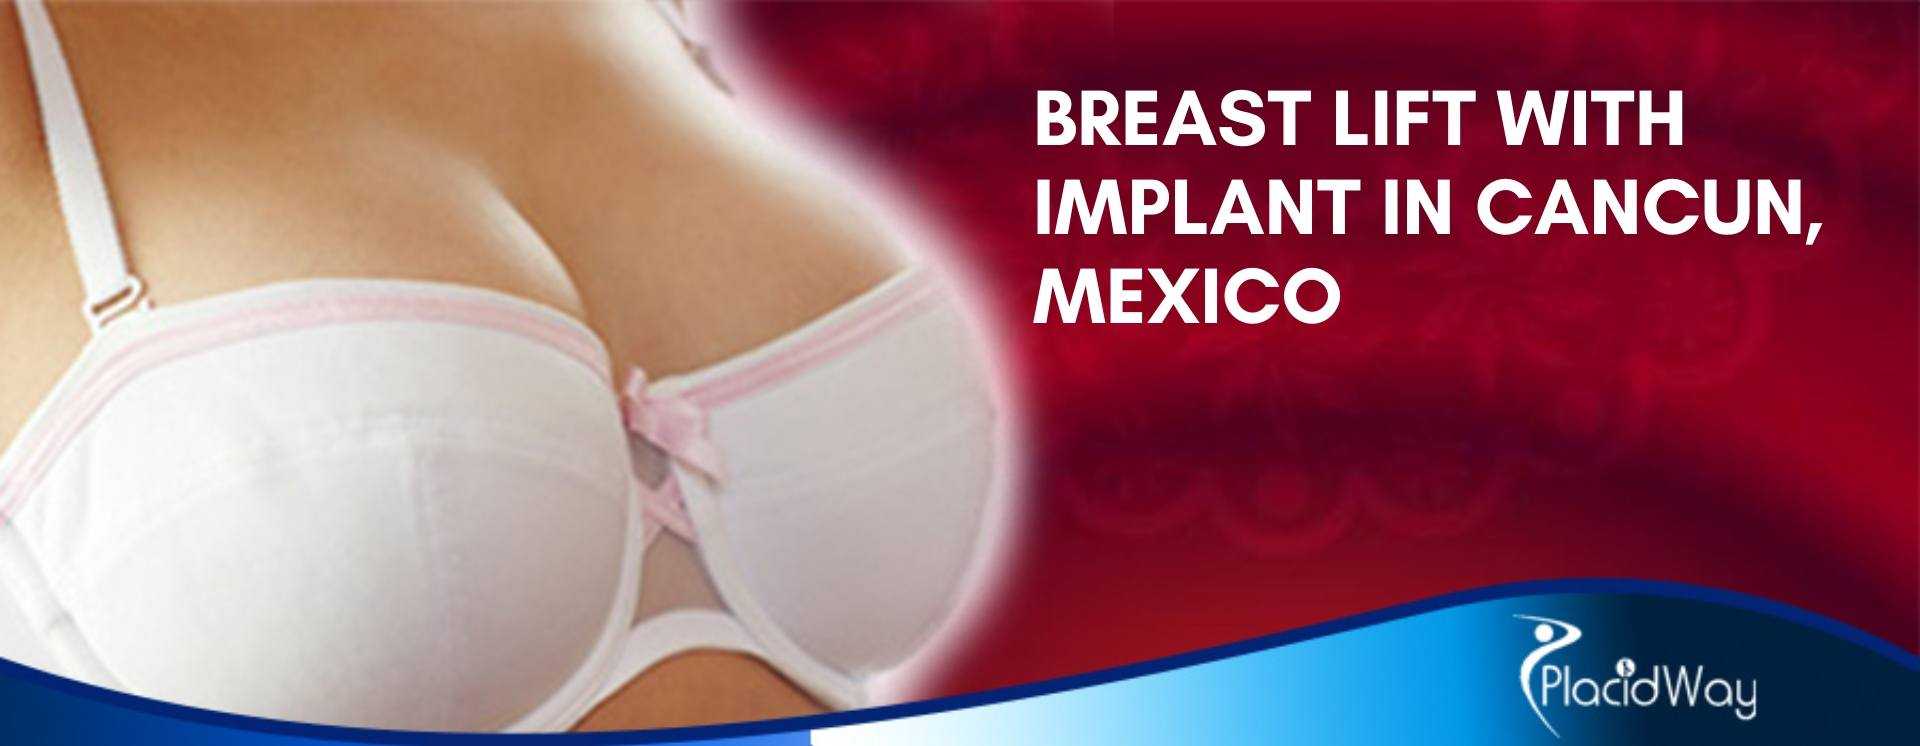 Breast Lift with Implant in Cancun, Mexico